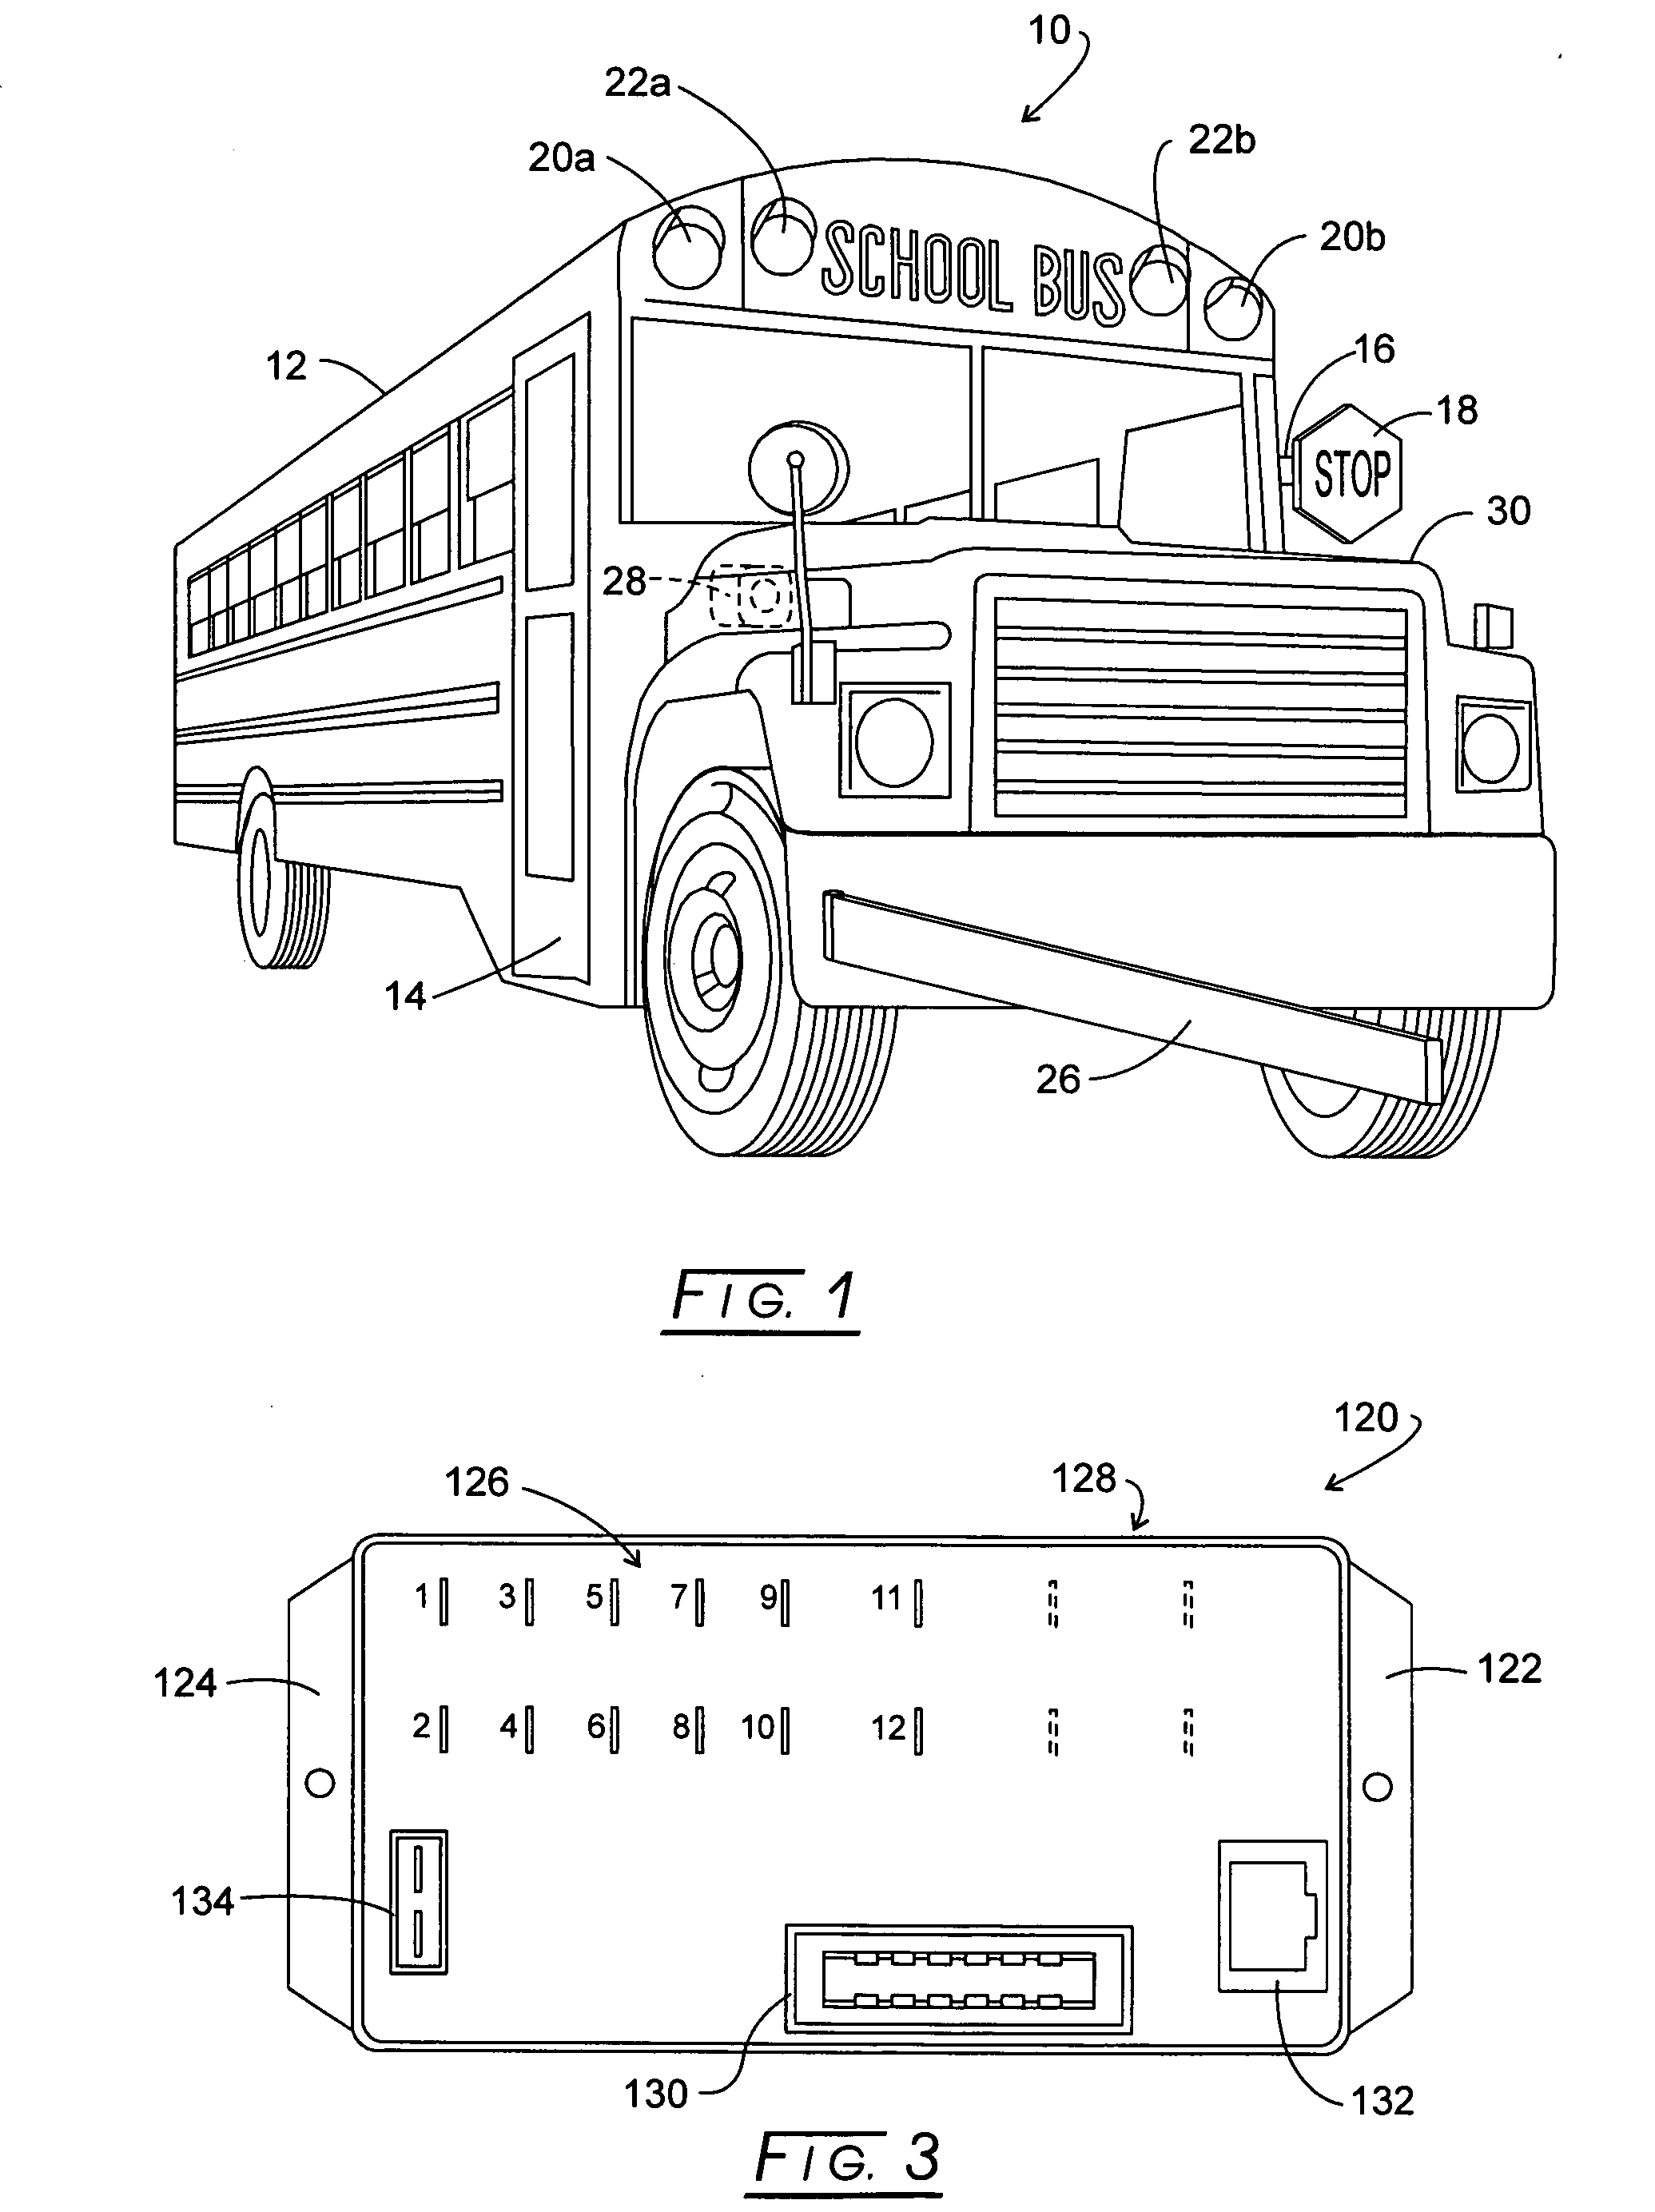 Bus safety controller method and system